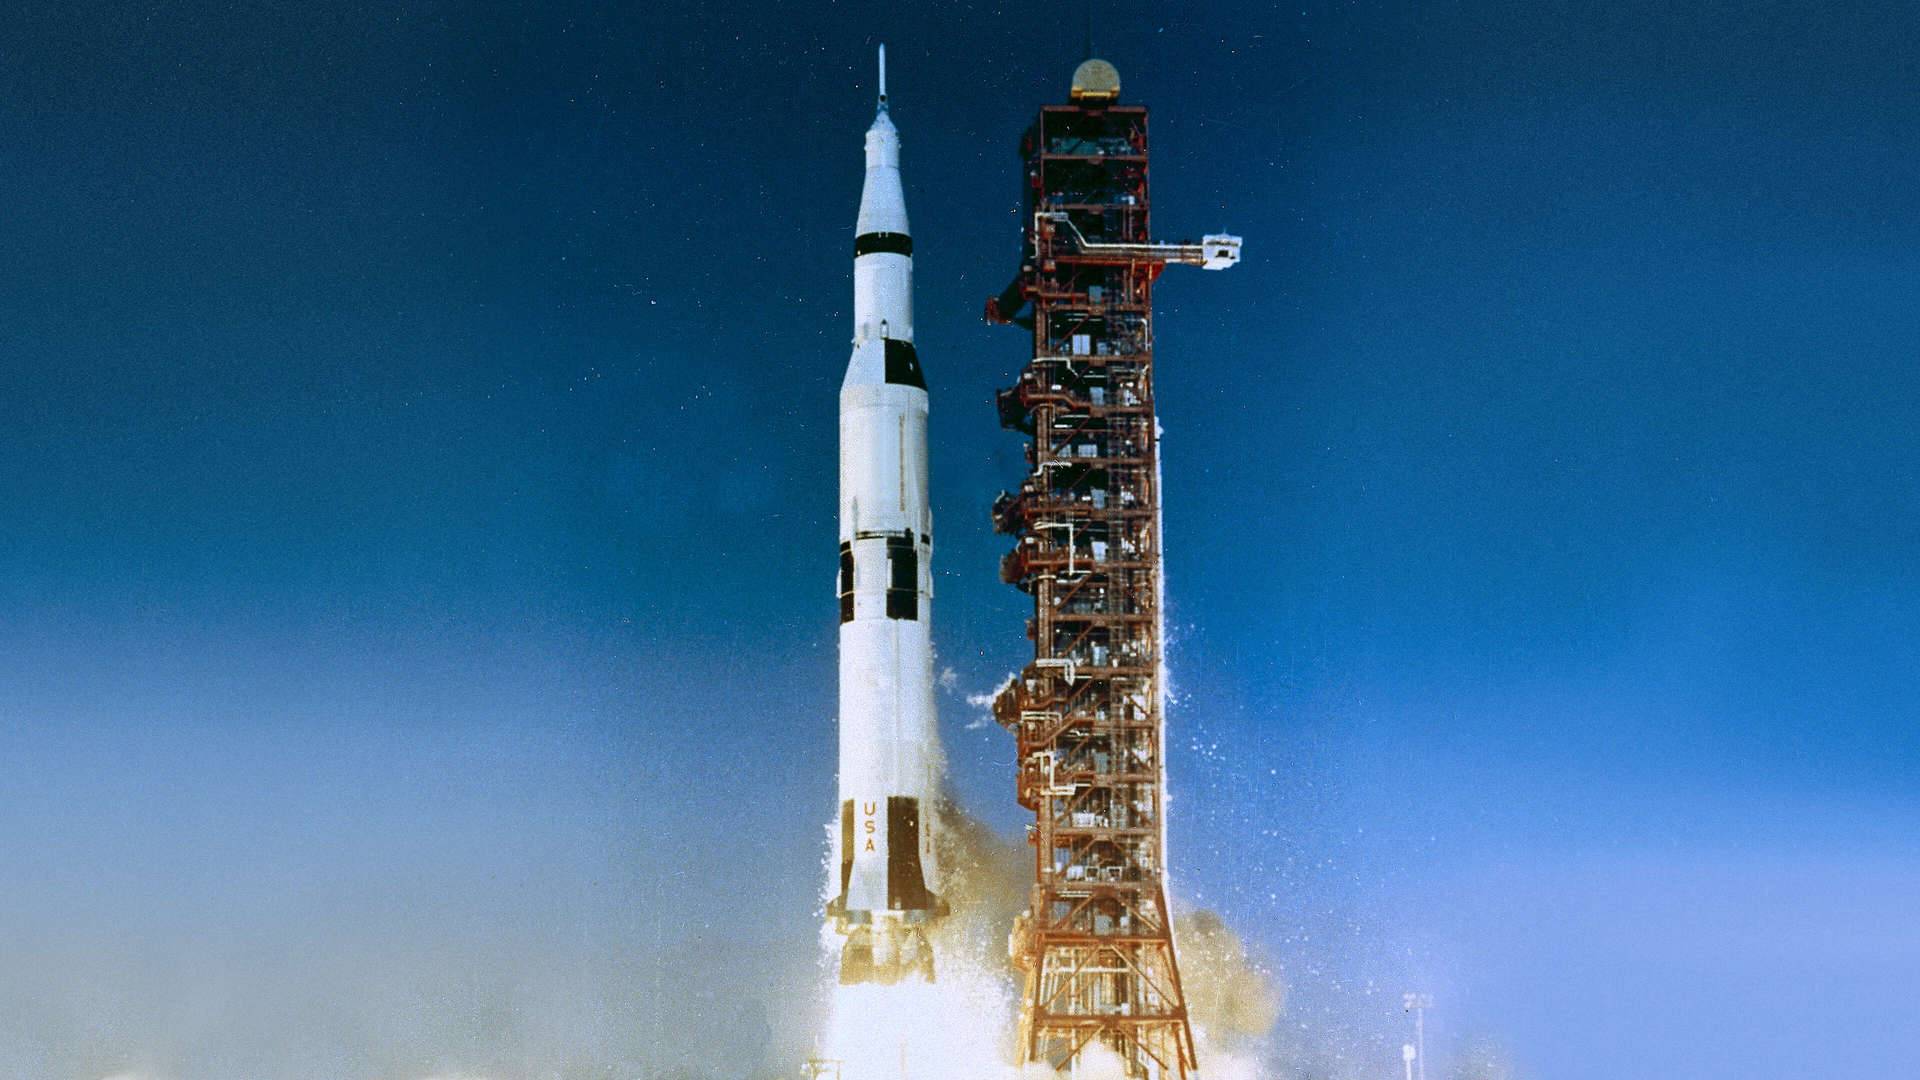 Saturn V Rocket  A technological marvel that changed the world